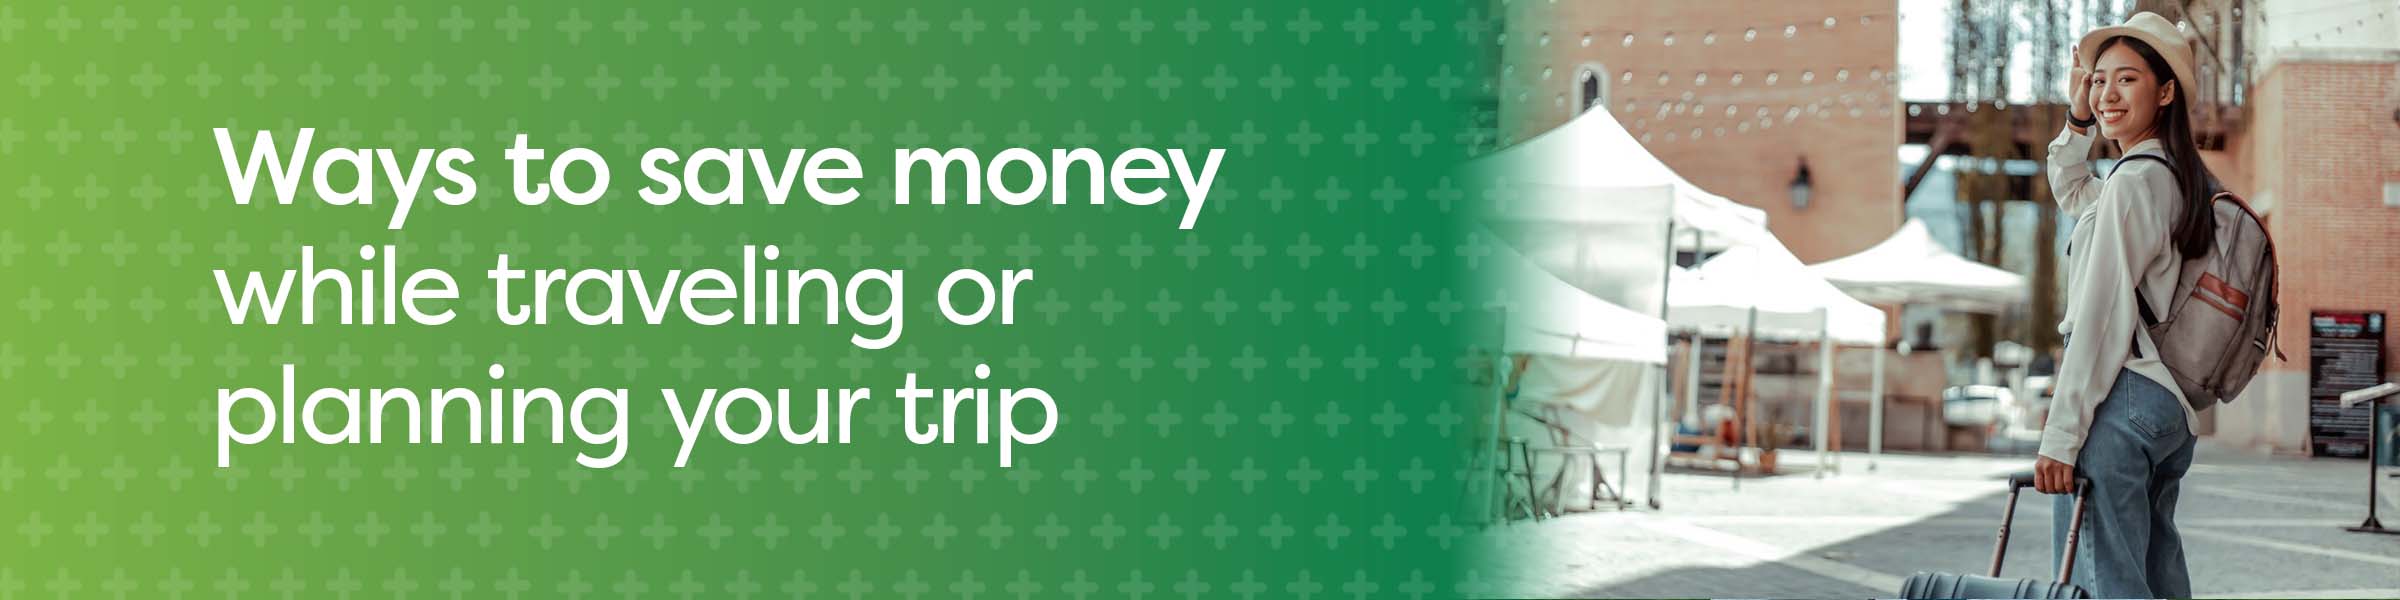 ways to save money while travelling